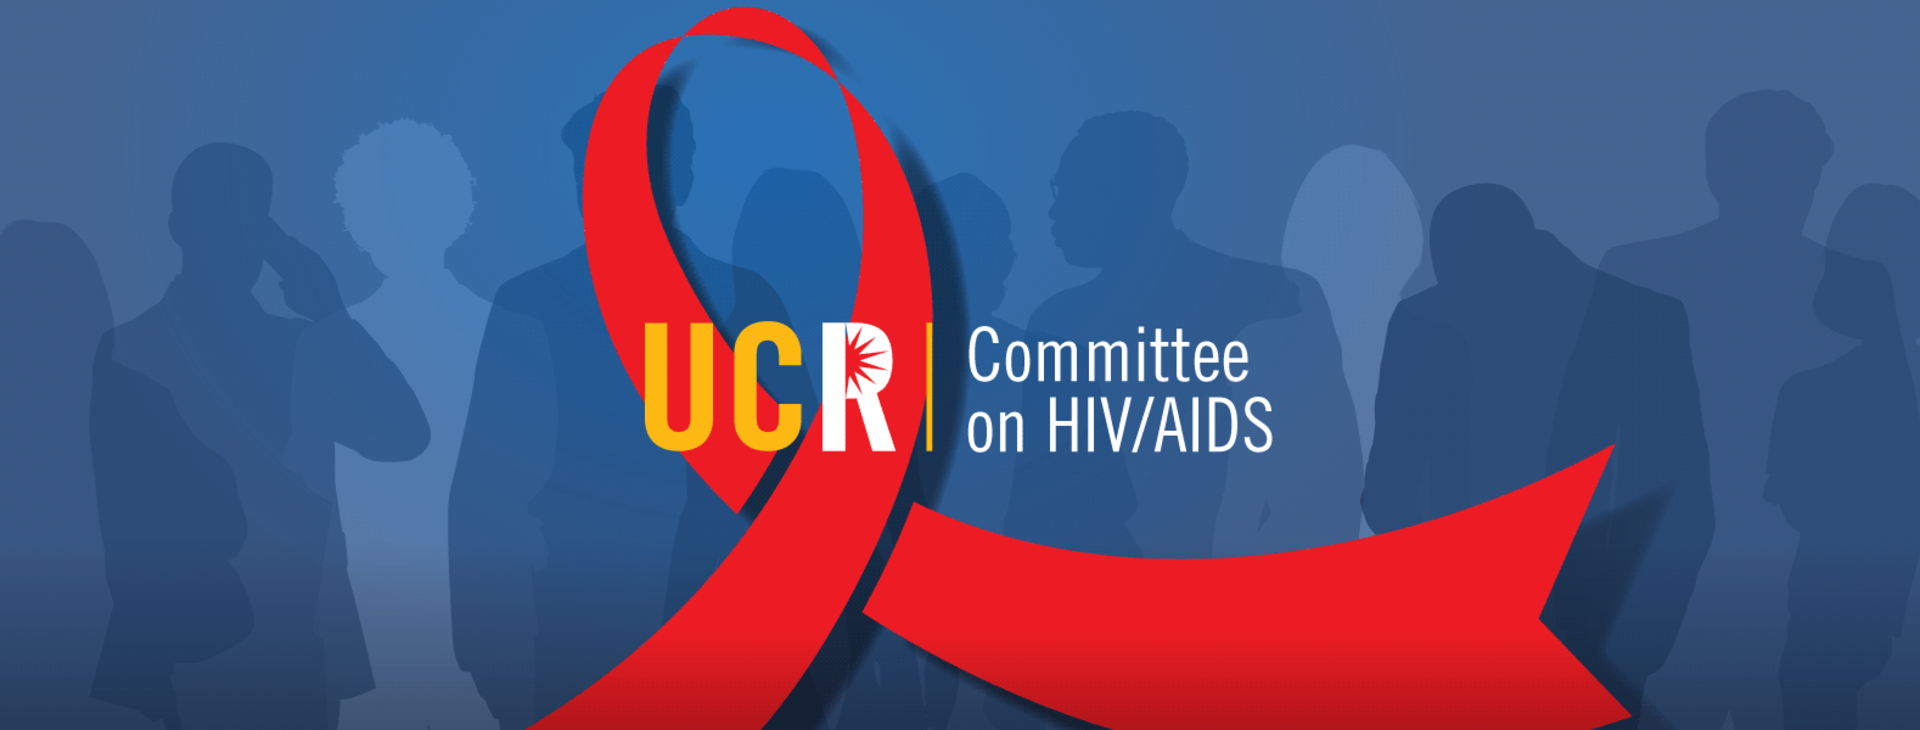 UCR Committee on HIV/AIDS